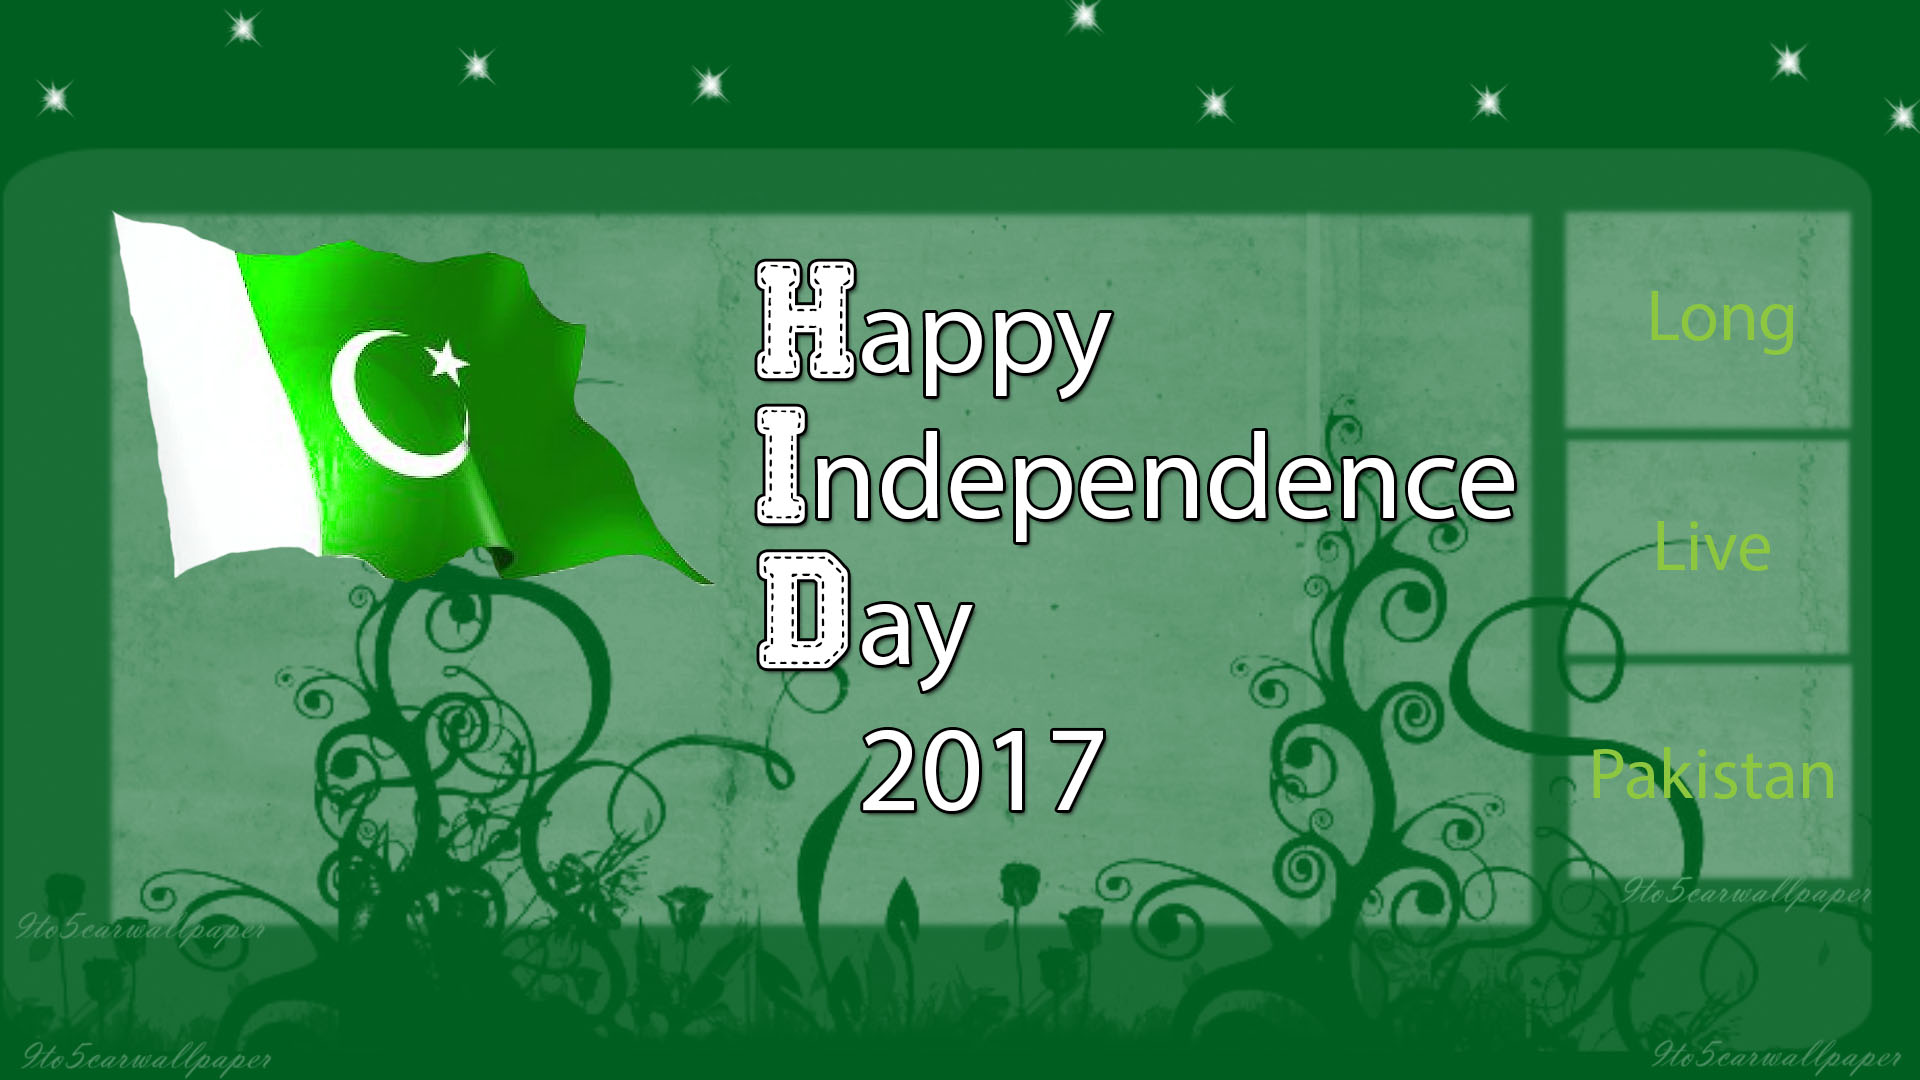 Long Live Pakistan Wallpapers Images - Graphic Design , HD Wallpaper & Backgrounds